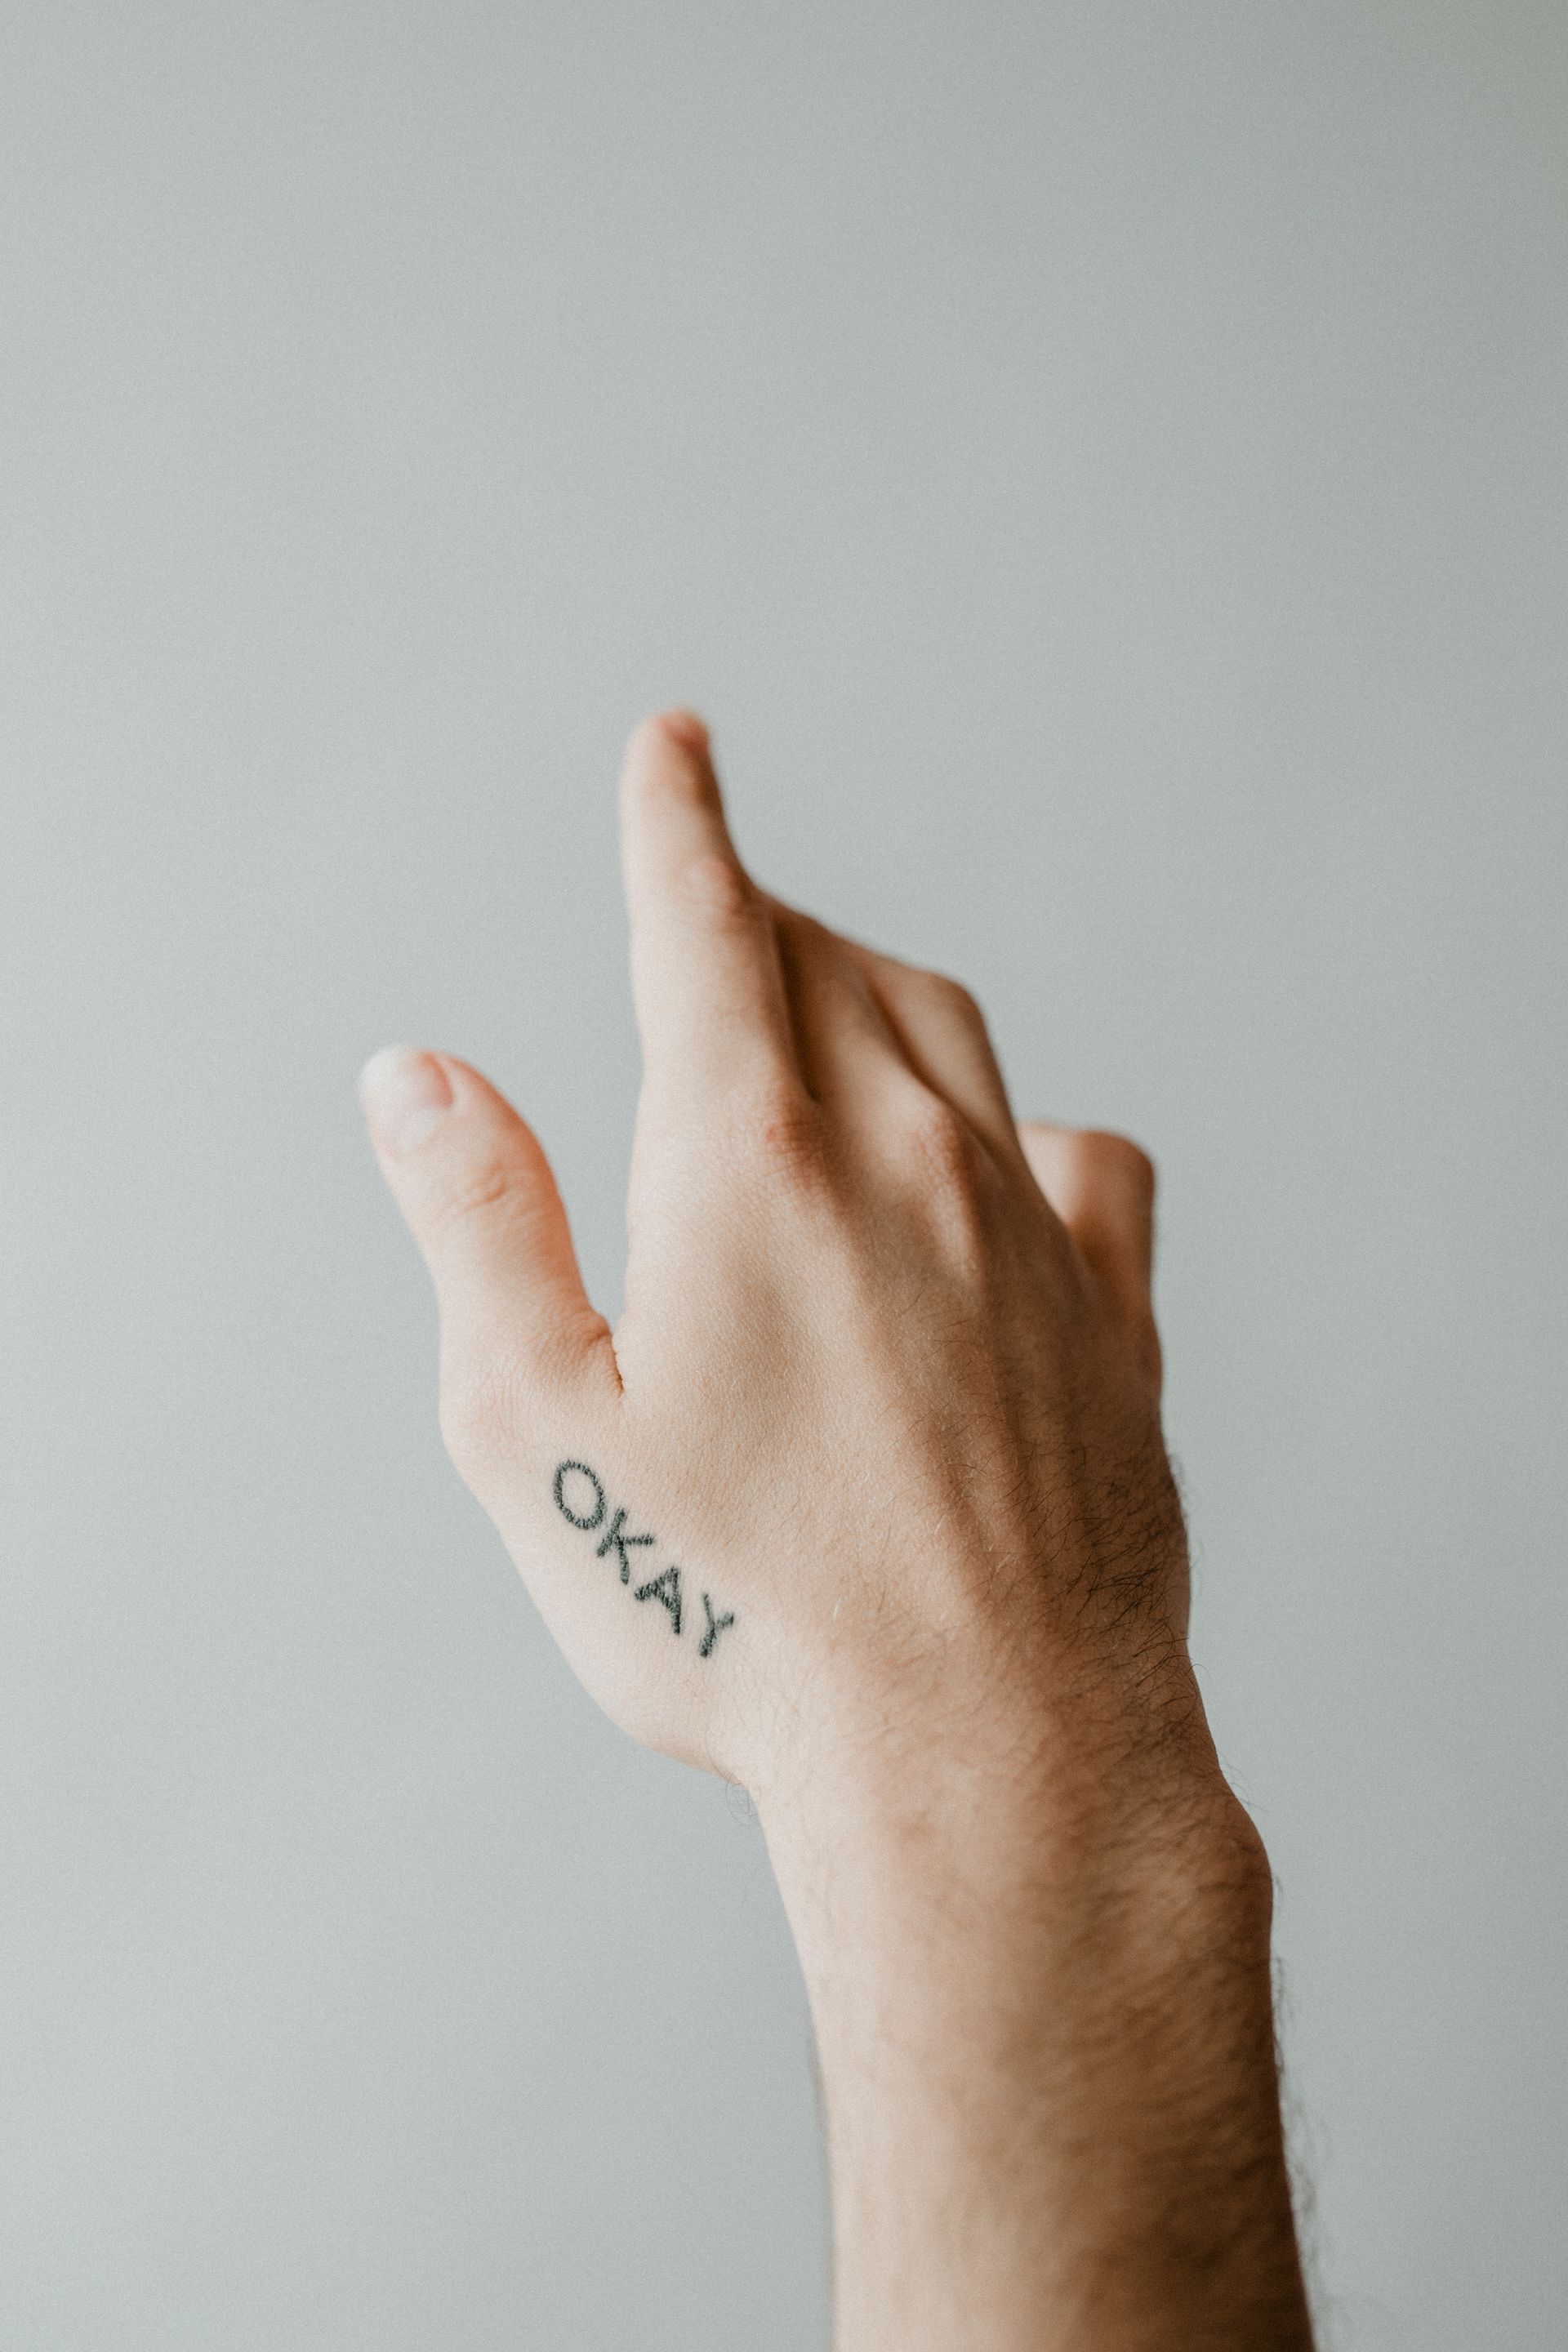 a hand with the word okay tattooed on it